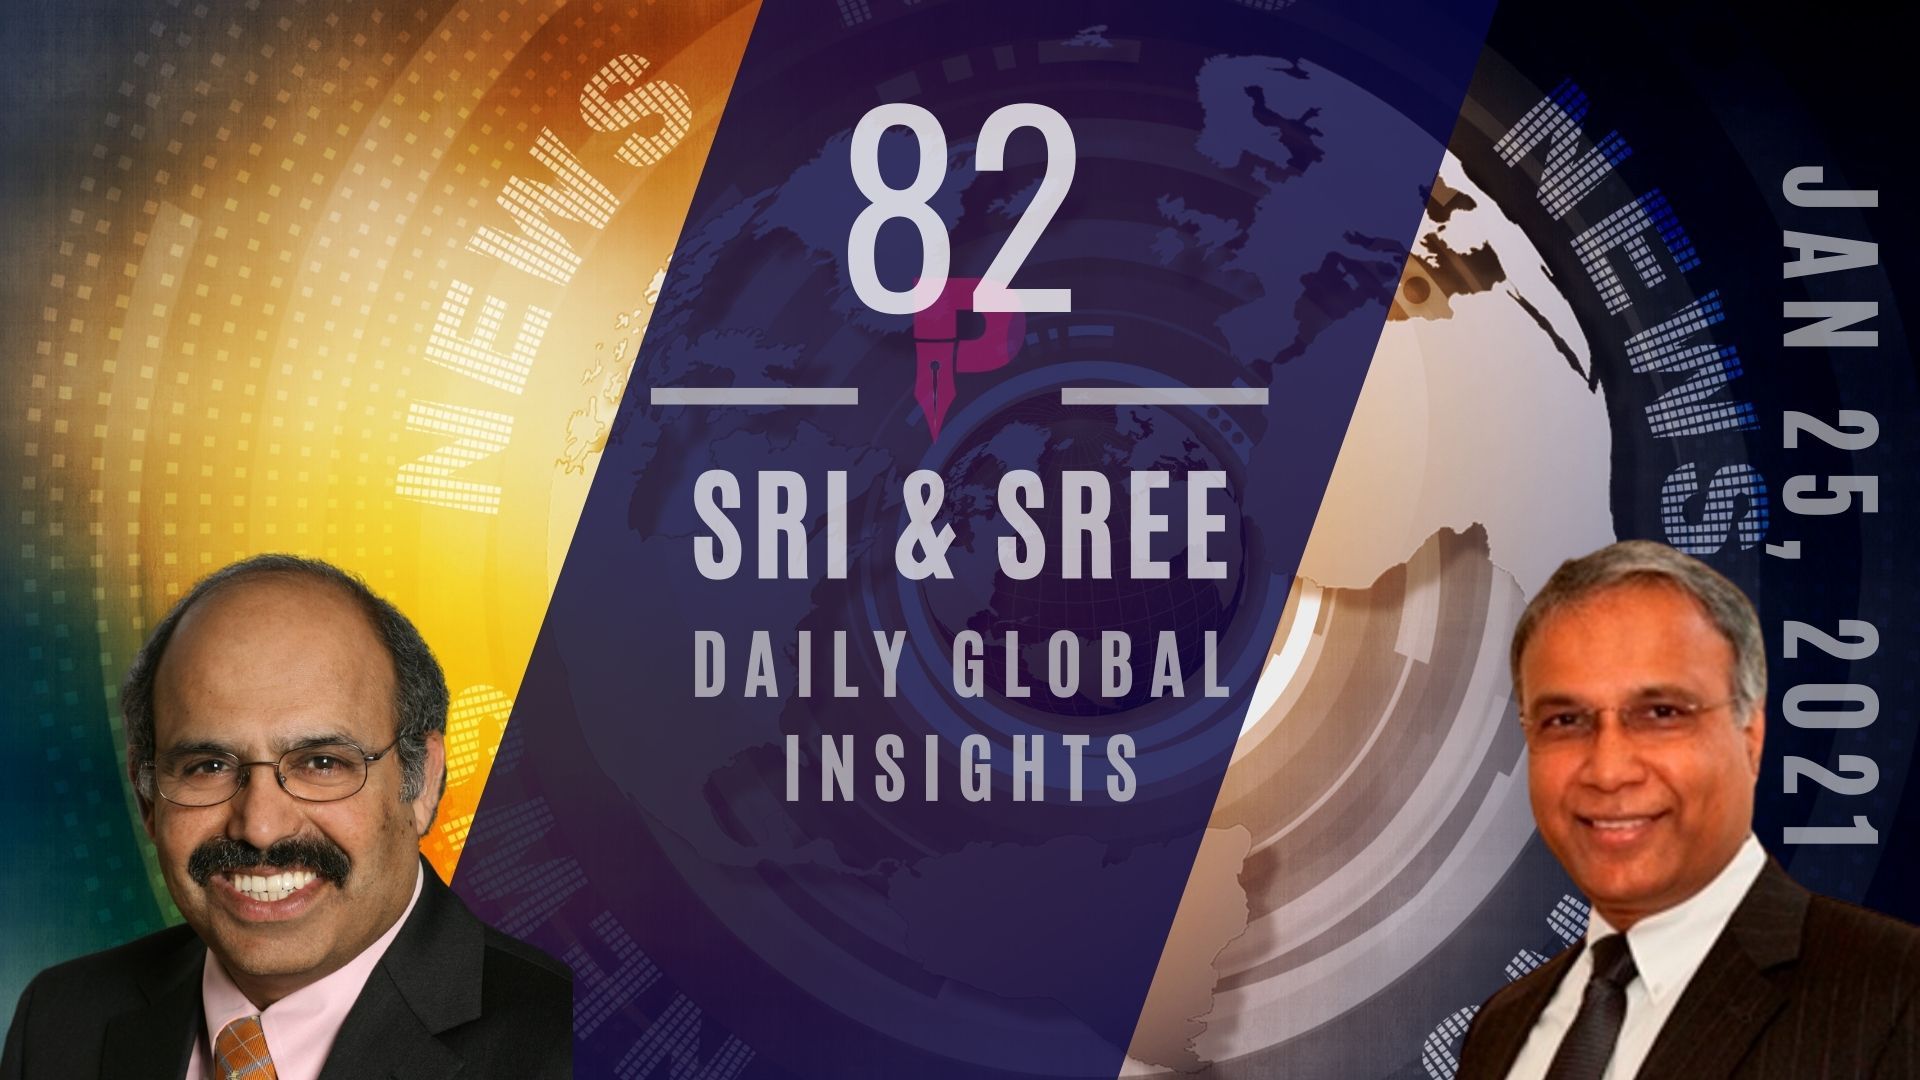 #DailyGlobalInsights #EP82 China tariffs, Yellenomics clarification, witch hunt against Fox anchors & more!